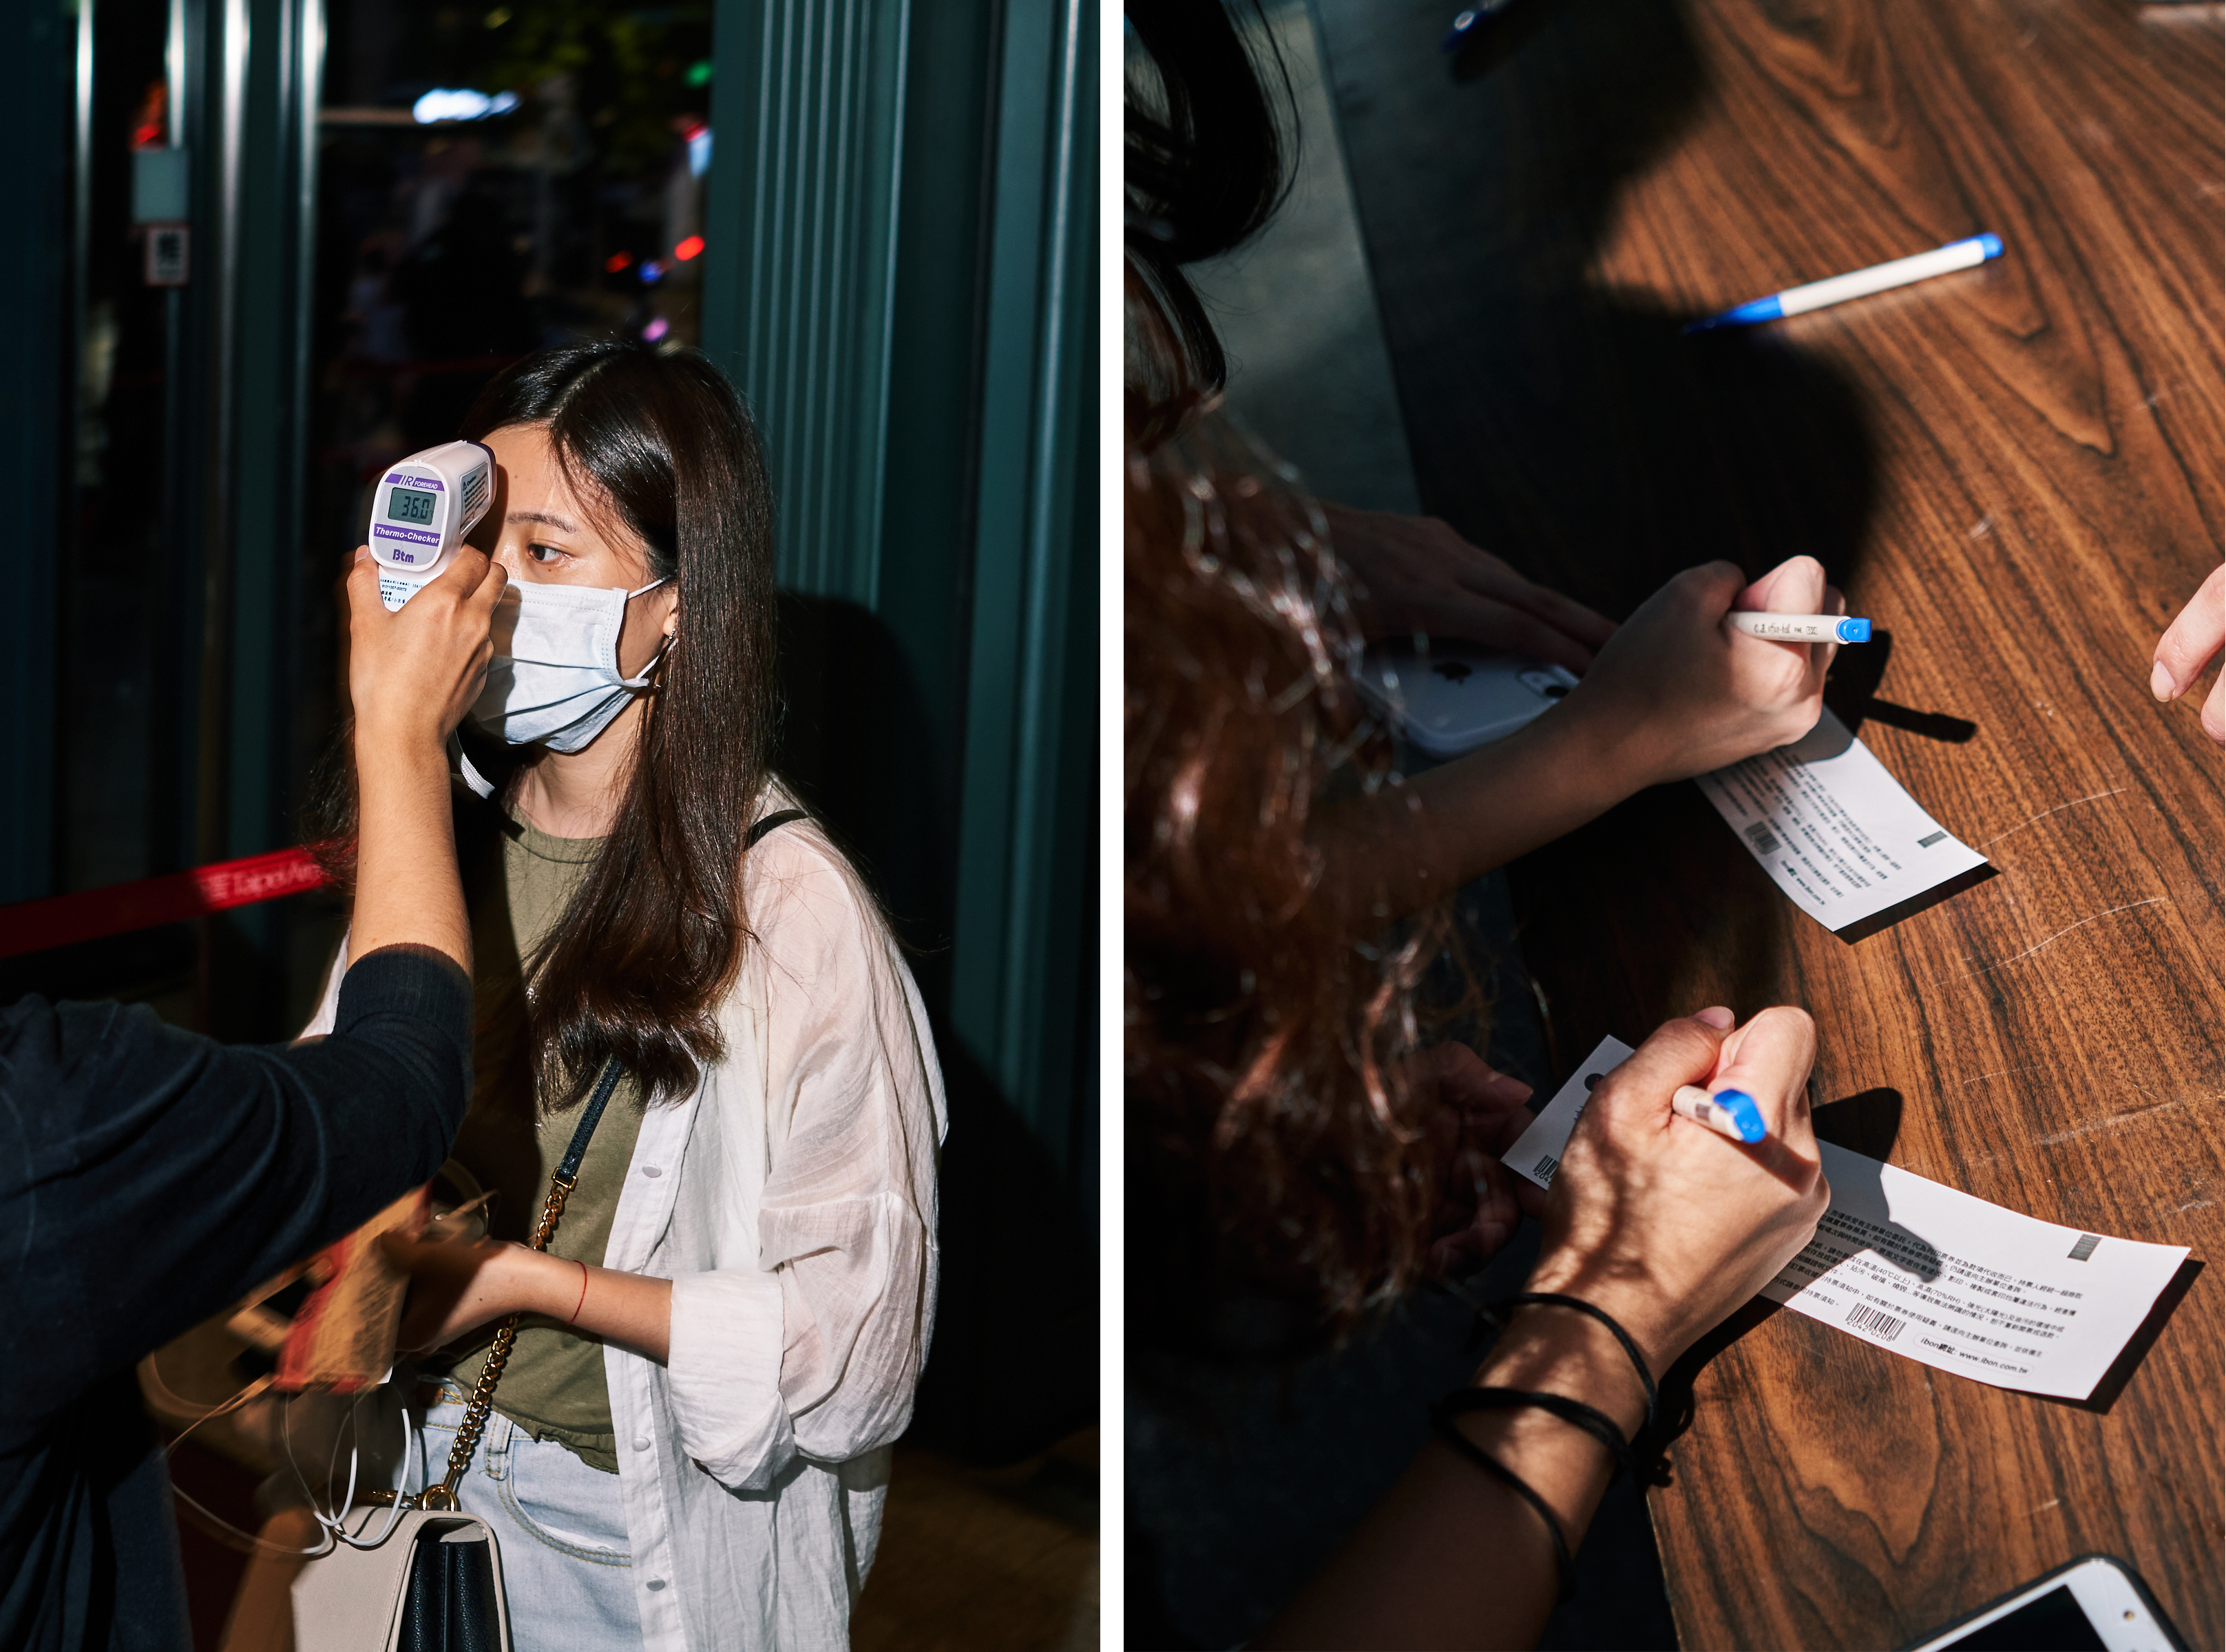 Left: An attendee receives a temperature check. Based on guidelines from the Taipei City Government Department of Health, no individual with a forehead temperature above 37.5°C (99.5°F) and ear temperature above 38°C (100.4°F) could enter the venue. Right: Attendees write personal information on their ticket stubs to submit to venue staff before entering the Taipei Arena (An Rong Xu for TIME)